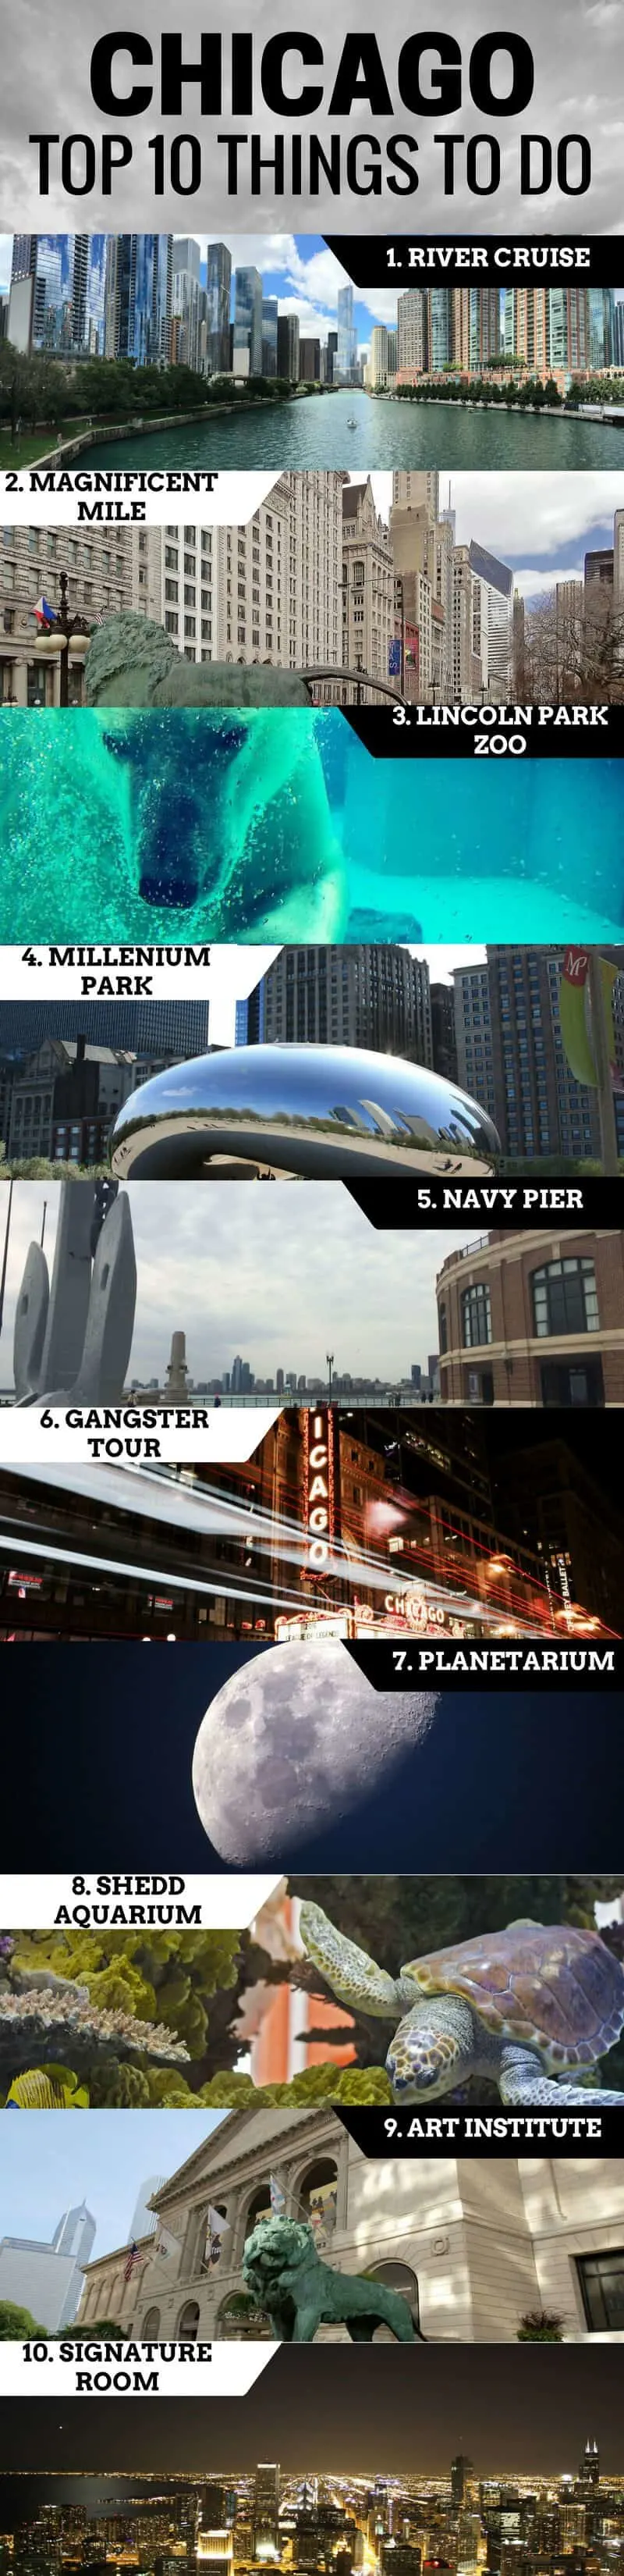 48 Hours in Chicago